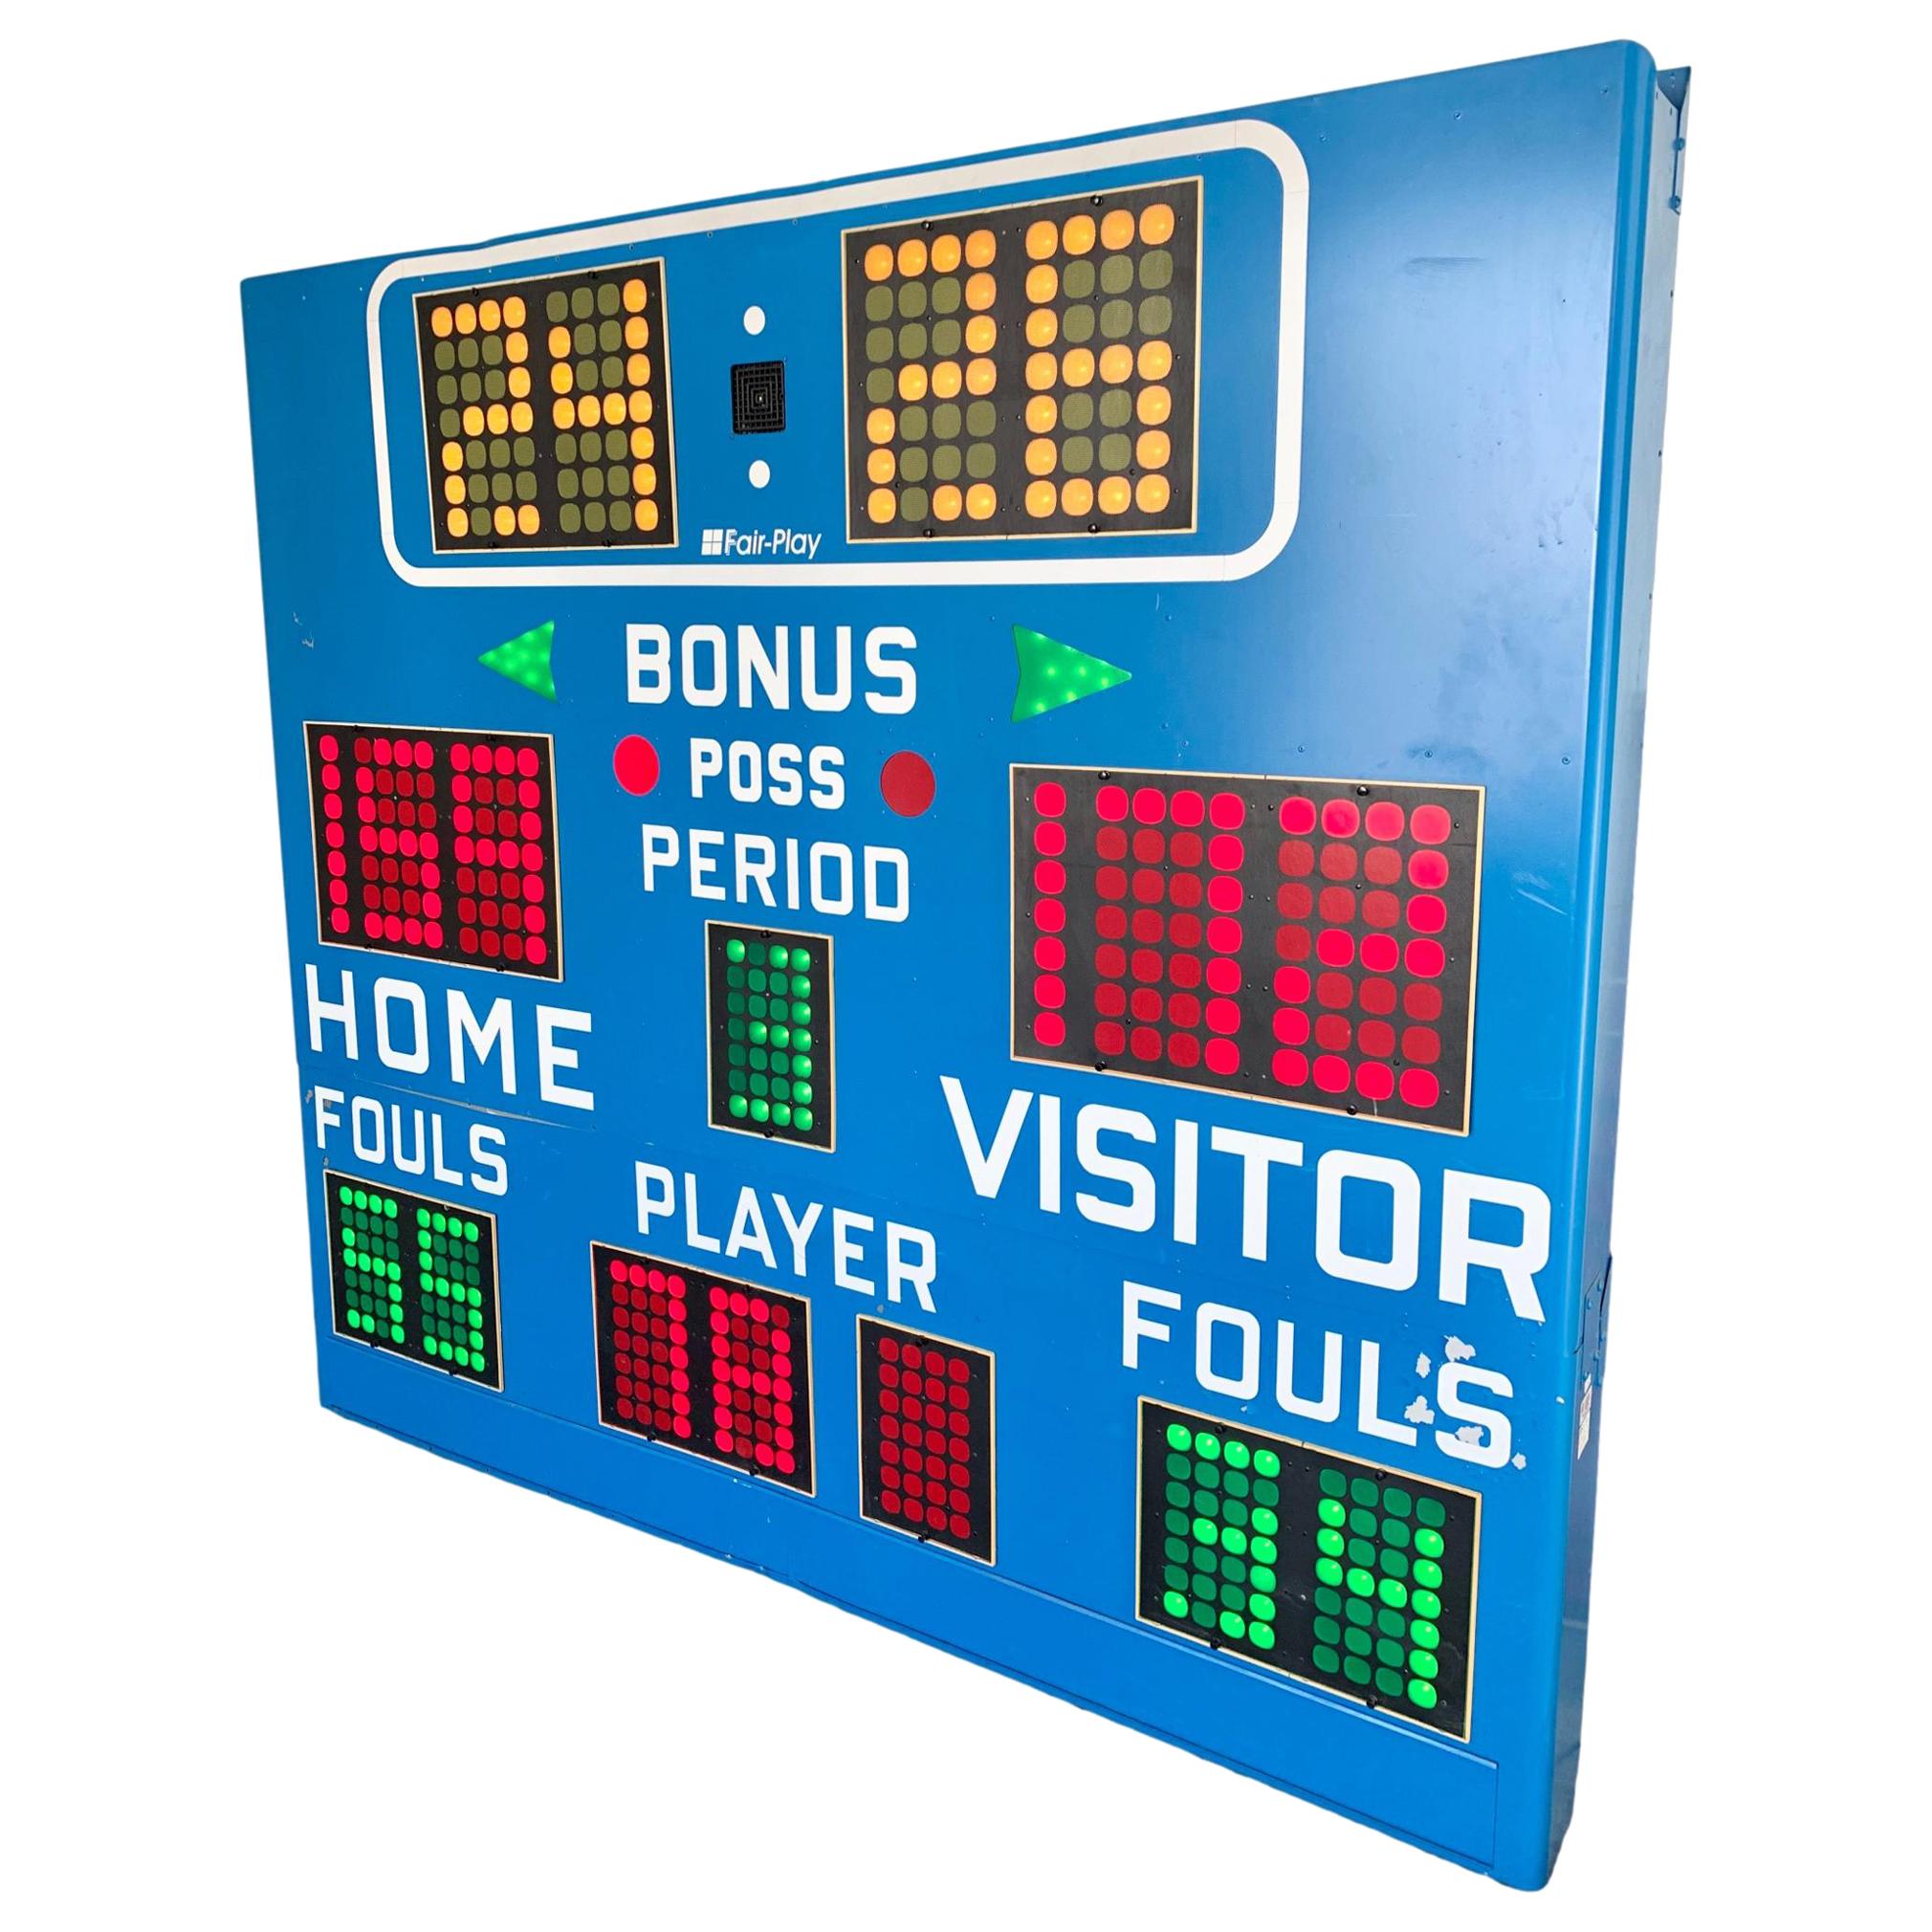 FAIR-PLAY SCOREBOARD FOUL LAMP BANKS PANEL USED GOOD CONDITION 